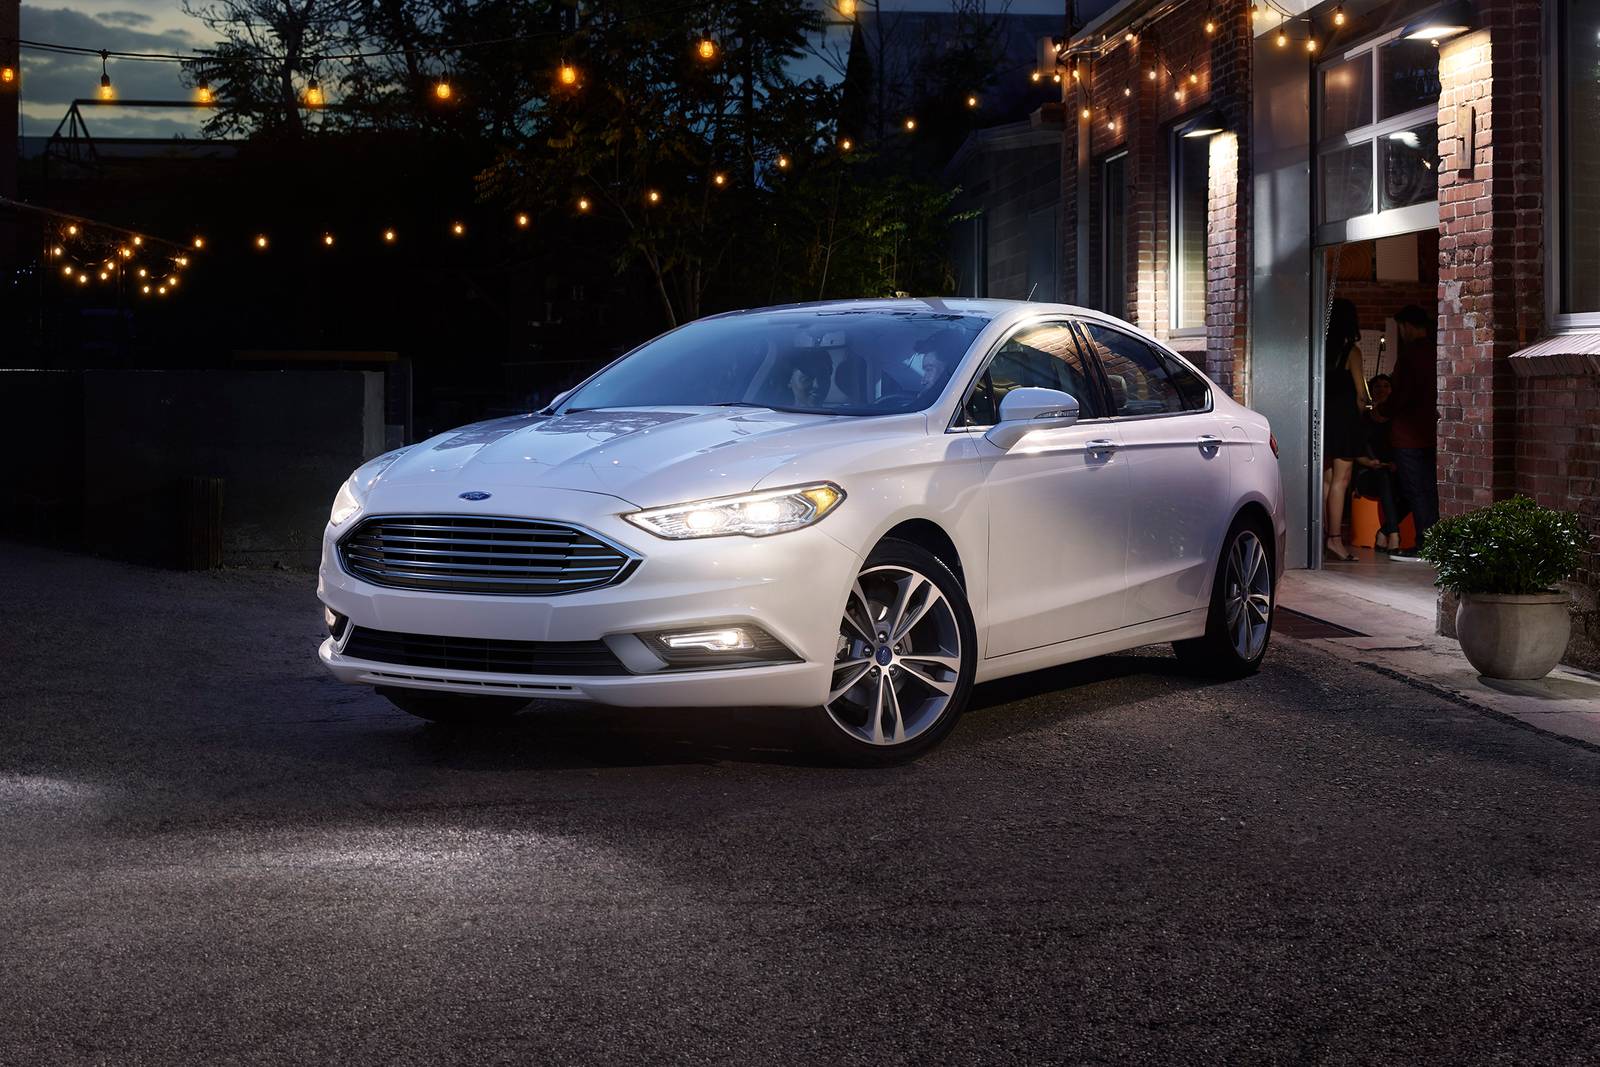 2018 Ford Fusion Review & Ratings | Edmunds